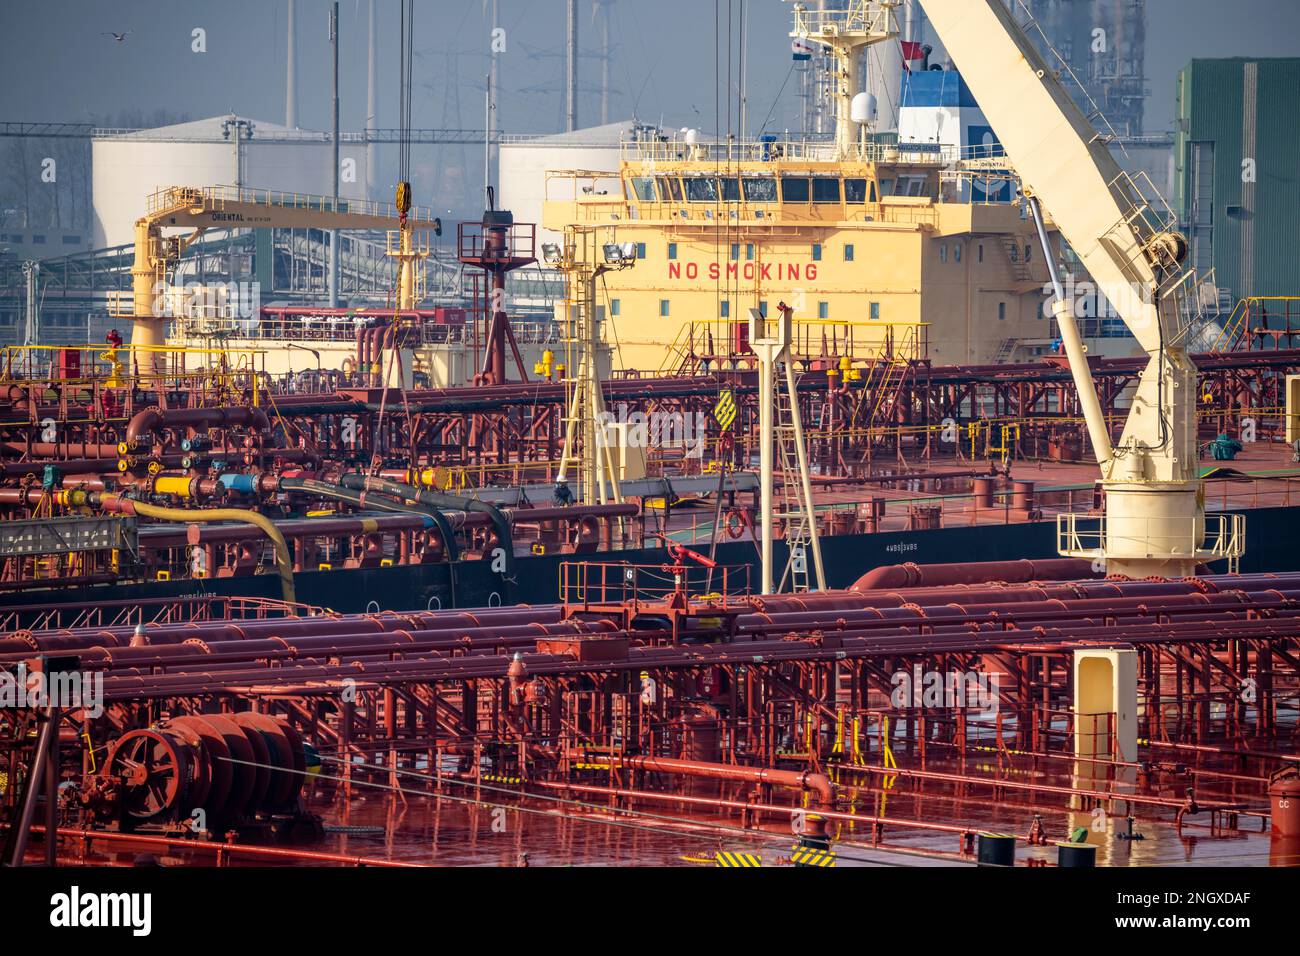 The crude oil tanker HOJO, in the seaport of Rotterdam, in the Petroleumhaven, Europoort, deck structures, pipelines, Rotterdam, Netherlands, Stock Photo